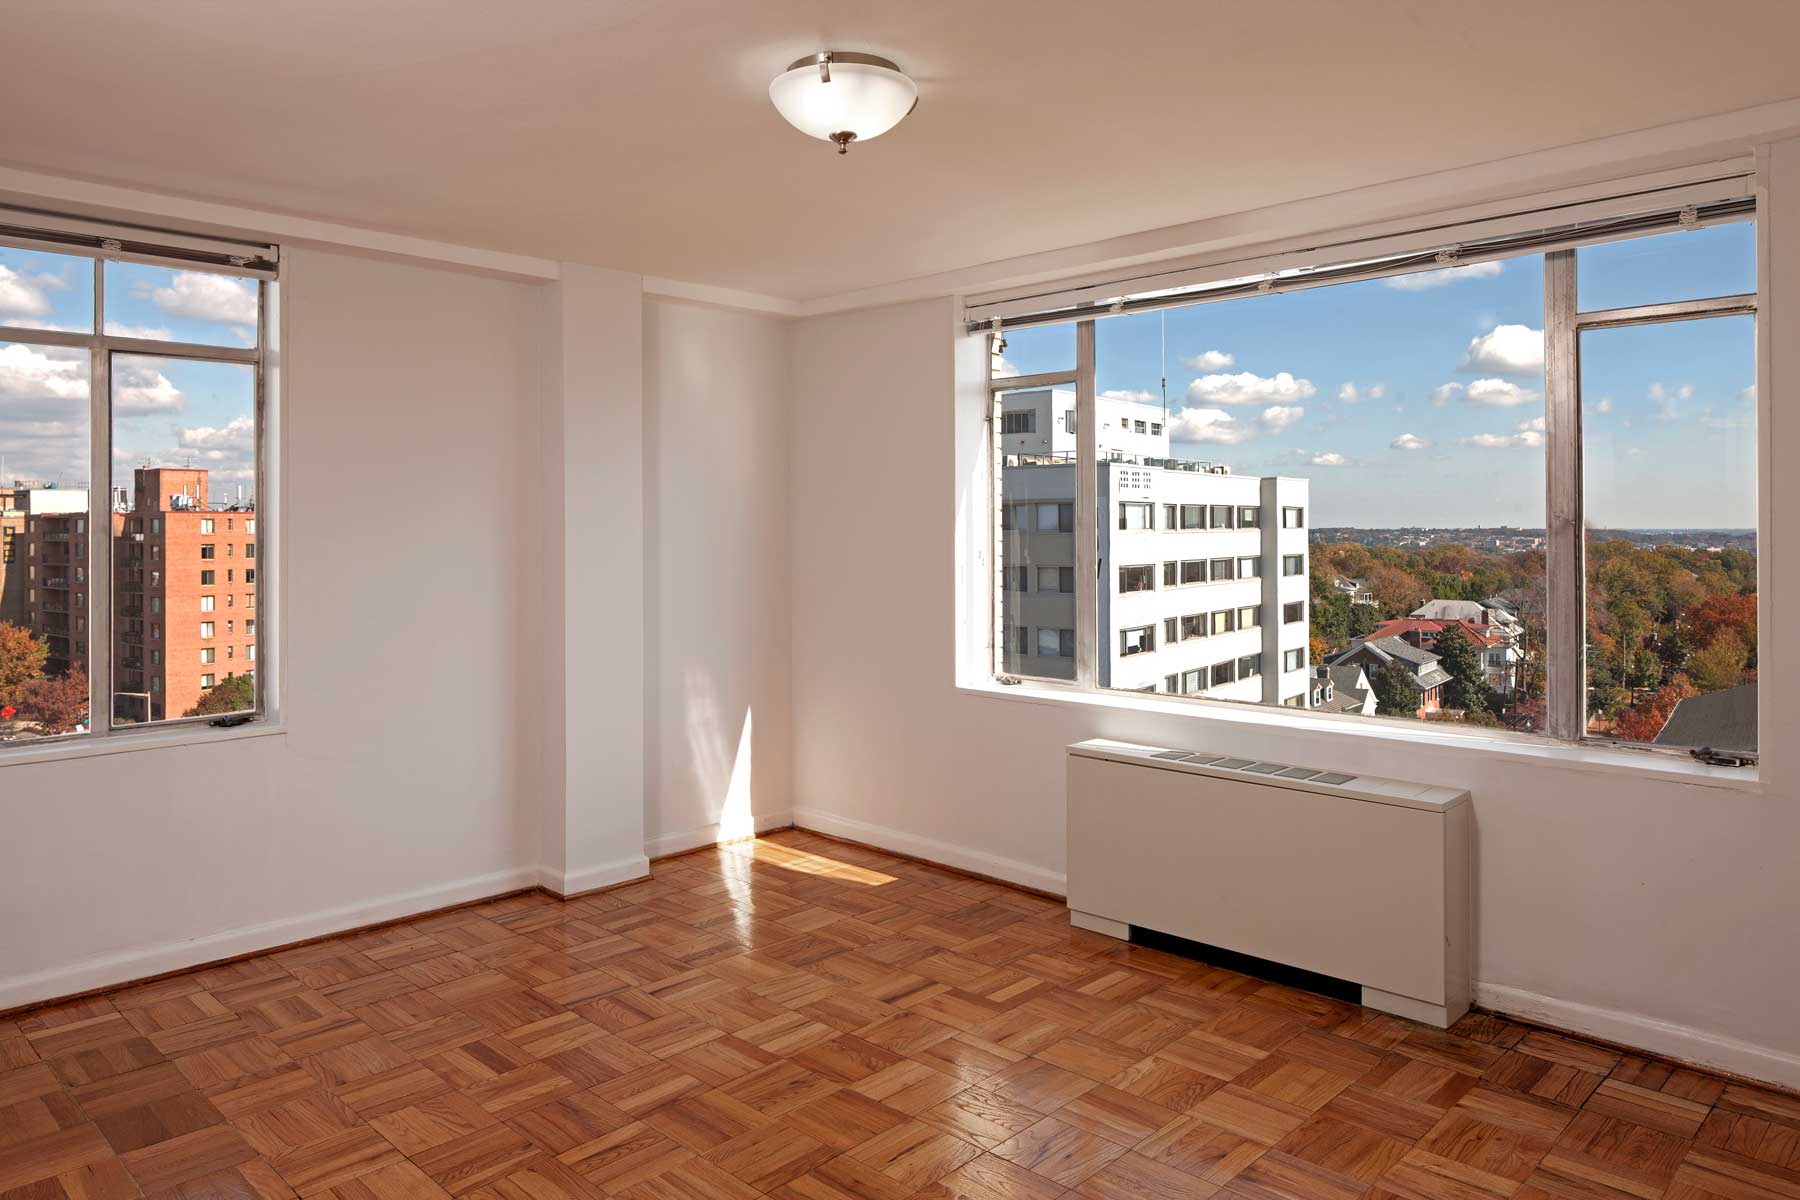 The Elaine unit with views of DC